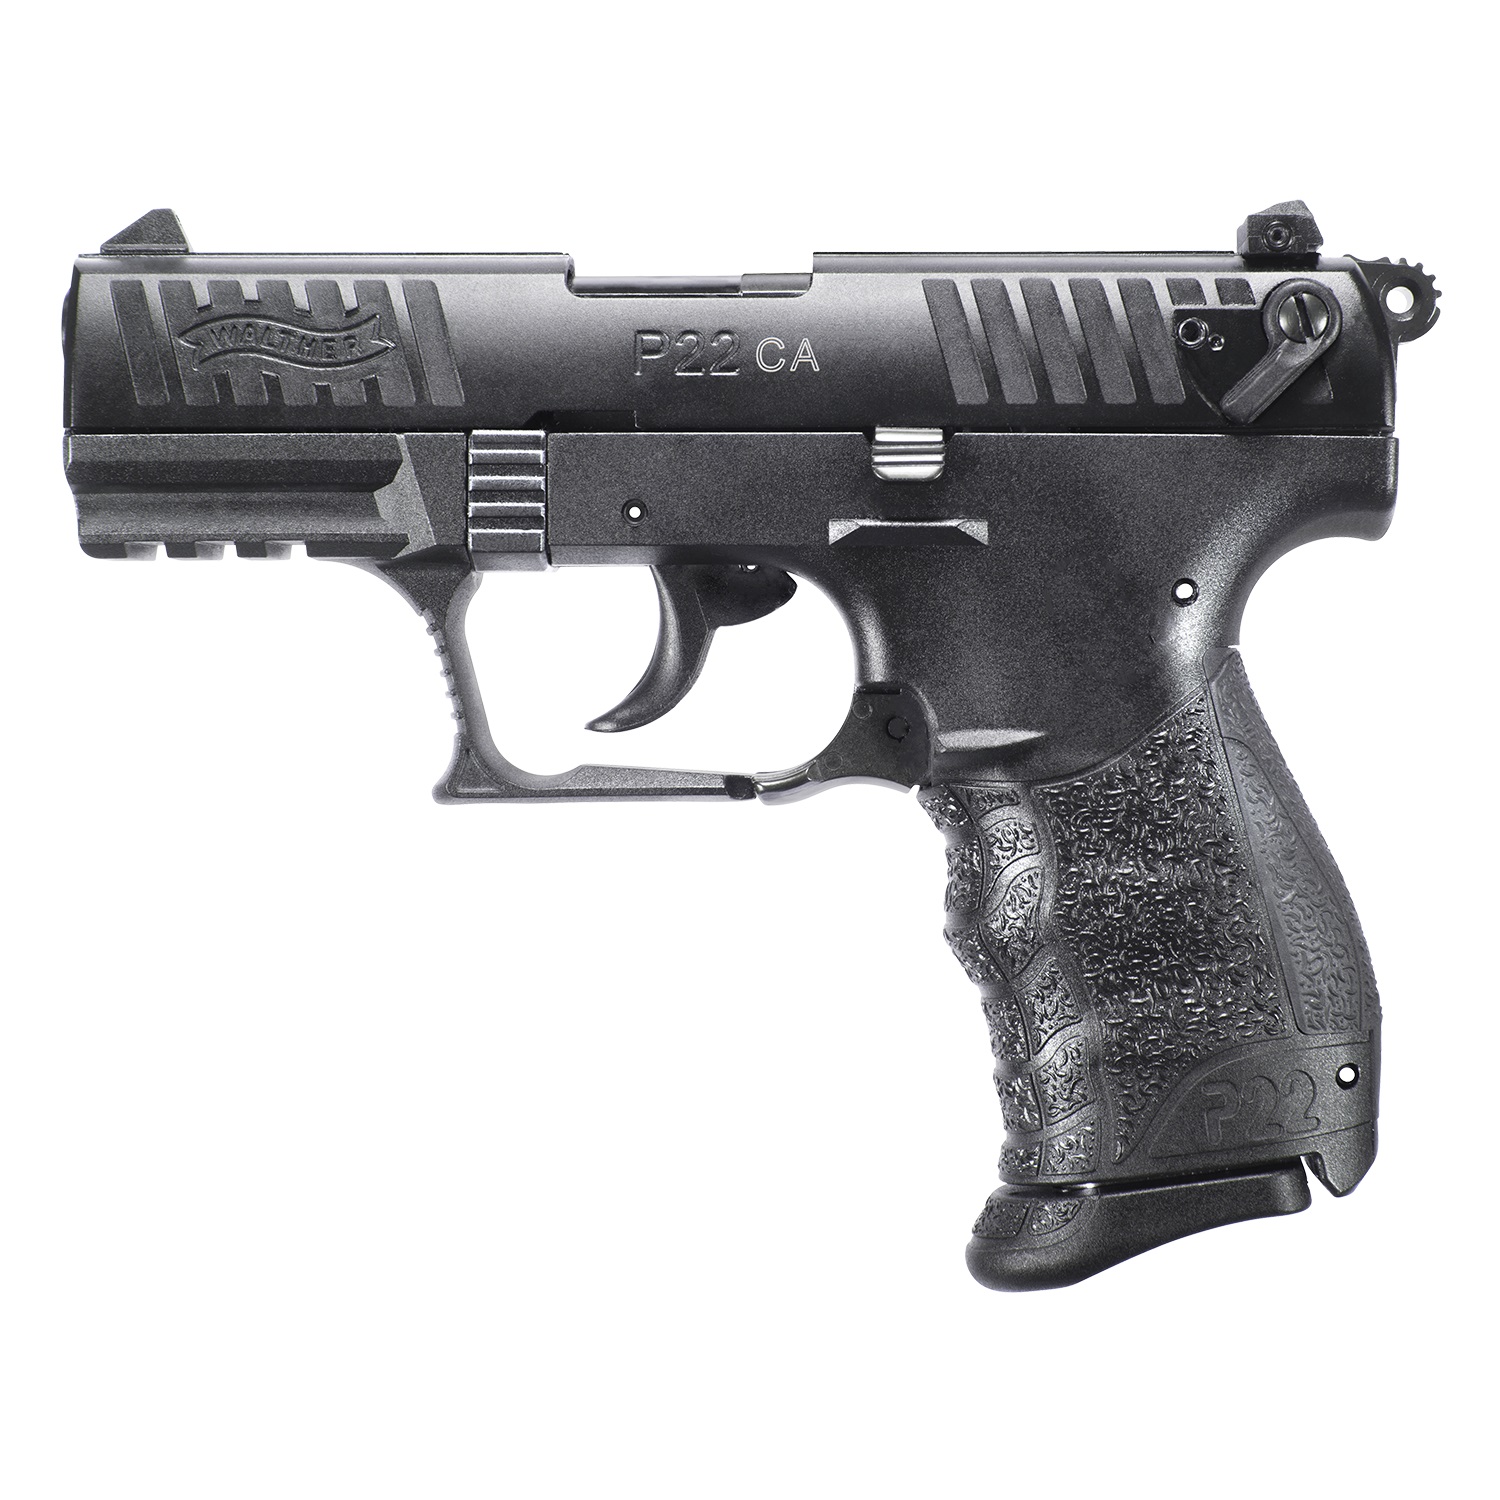 Walther Arms P22 22 LR